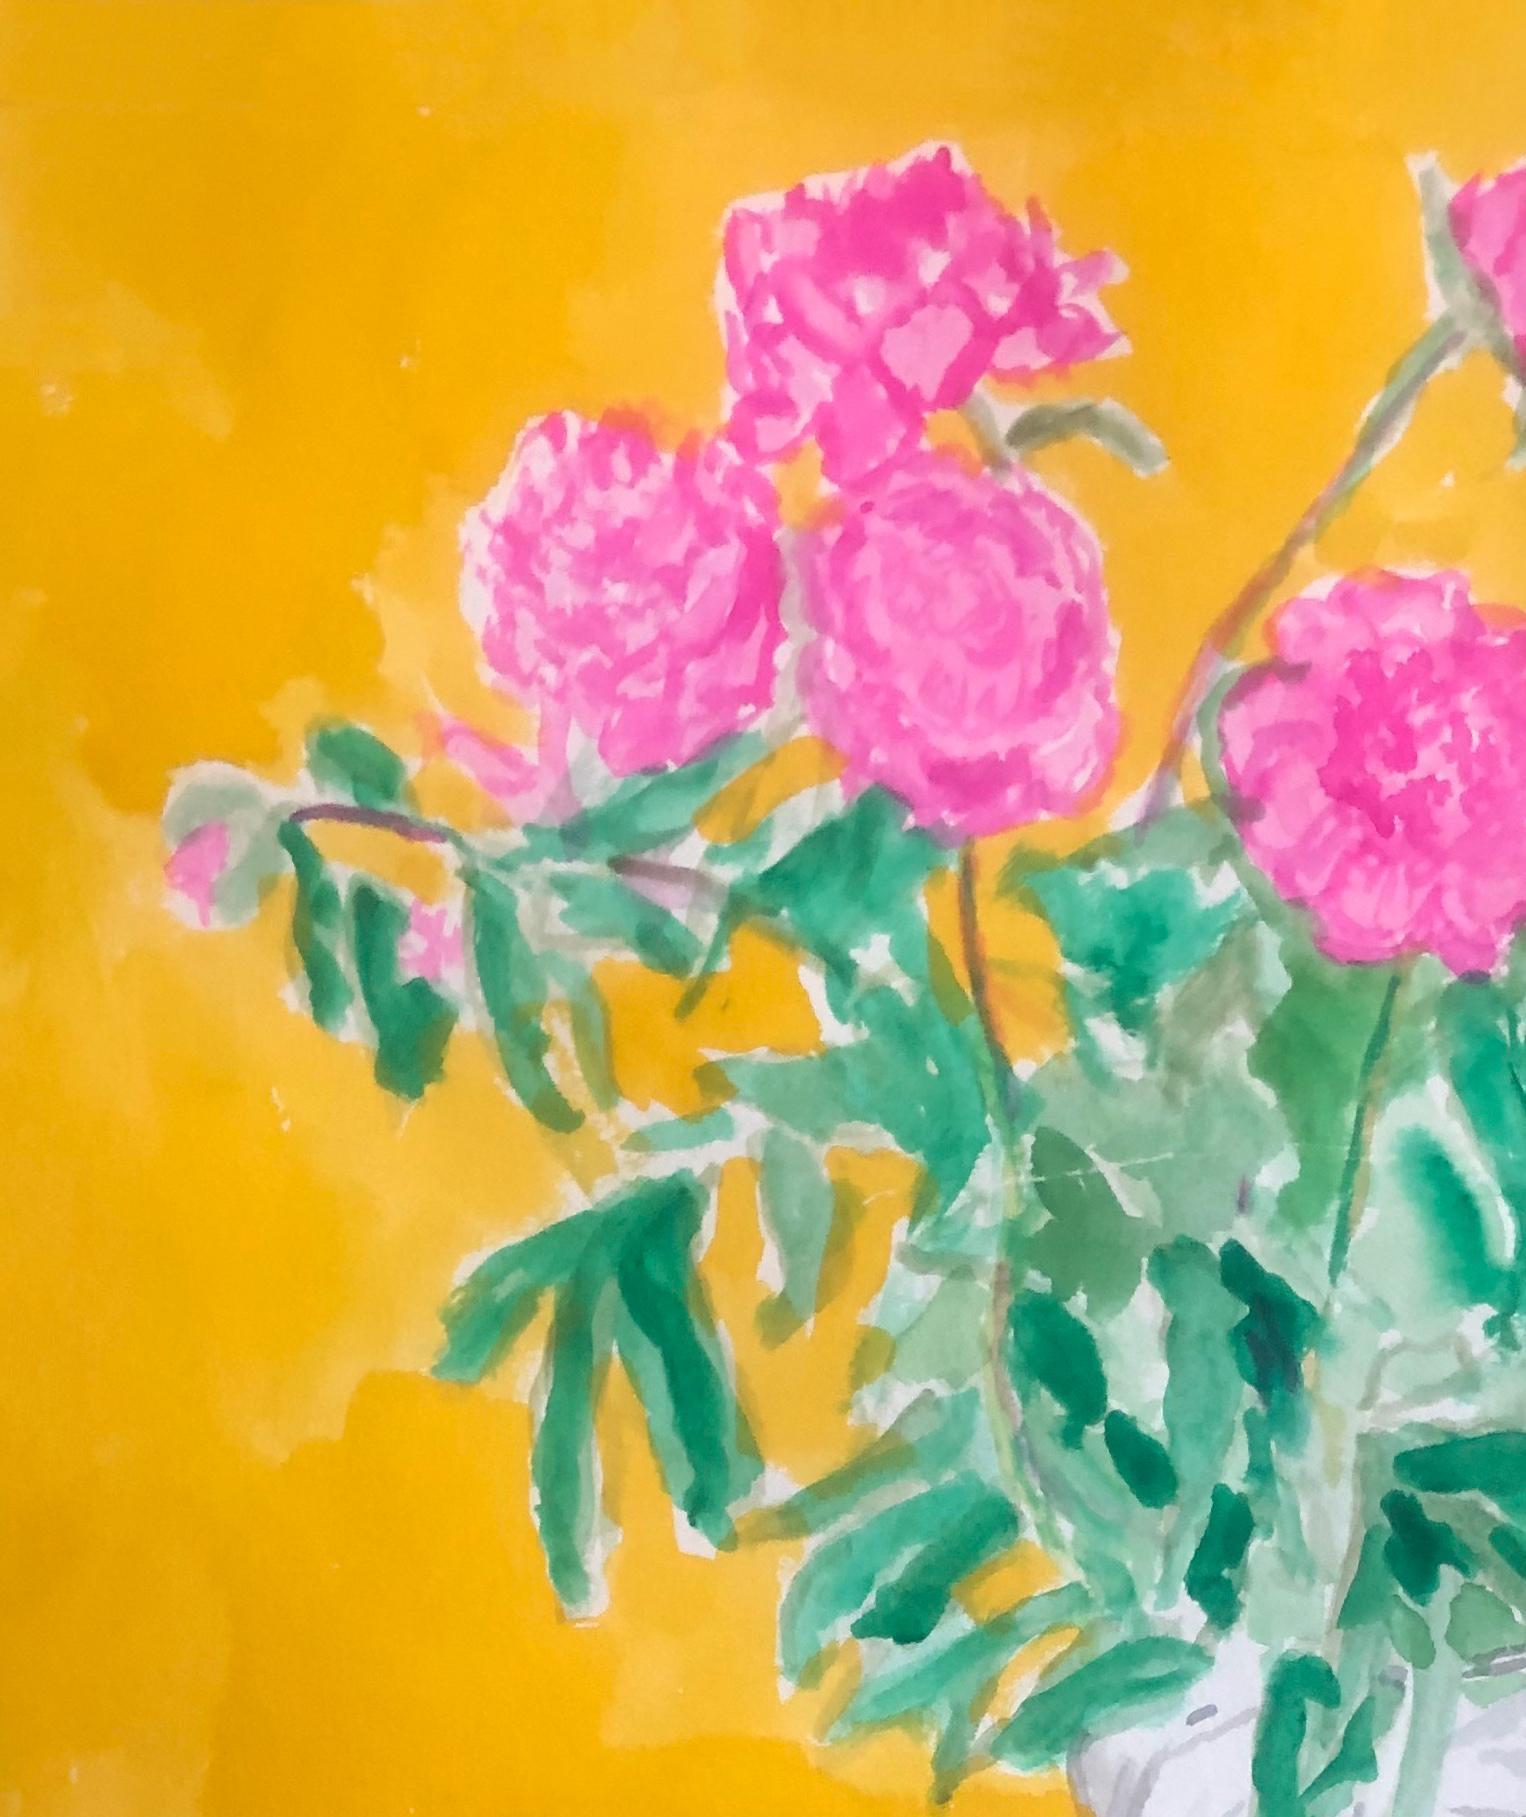 Vase of Peonies on French Napkin. Painting  From the Still Life Series - Art by Charlie Scheips